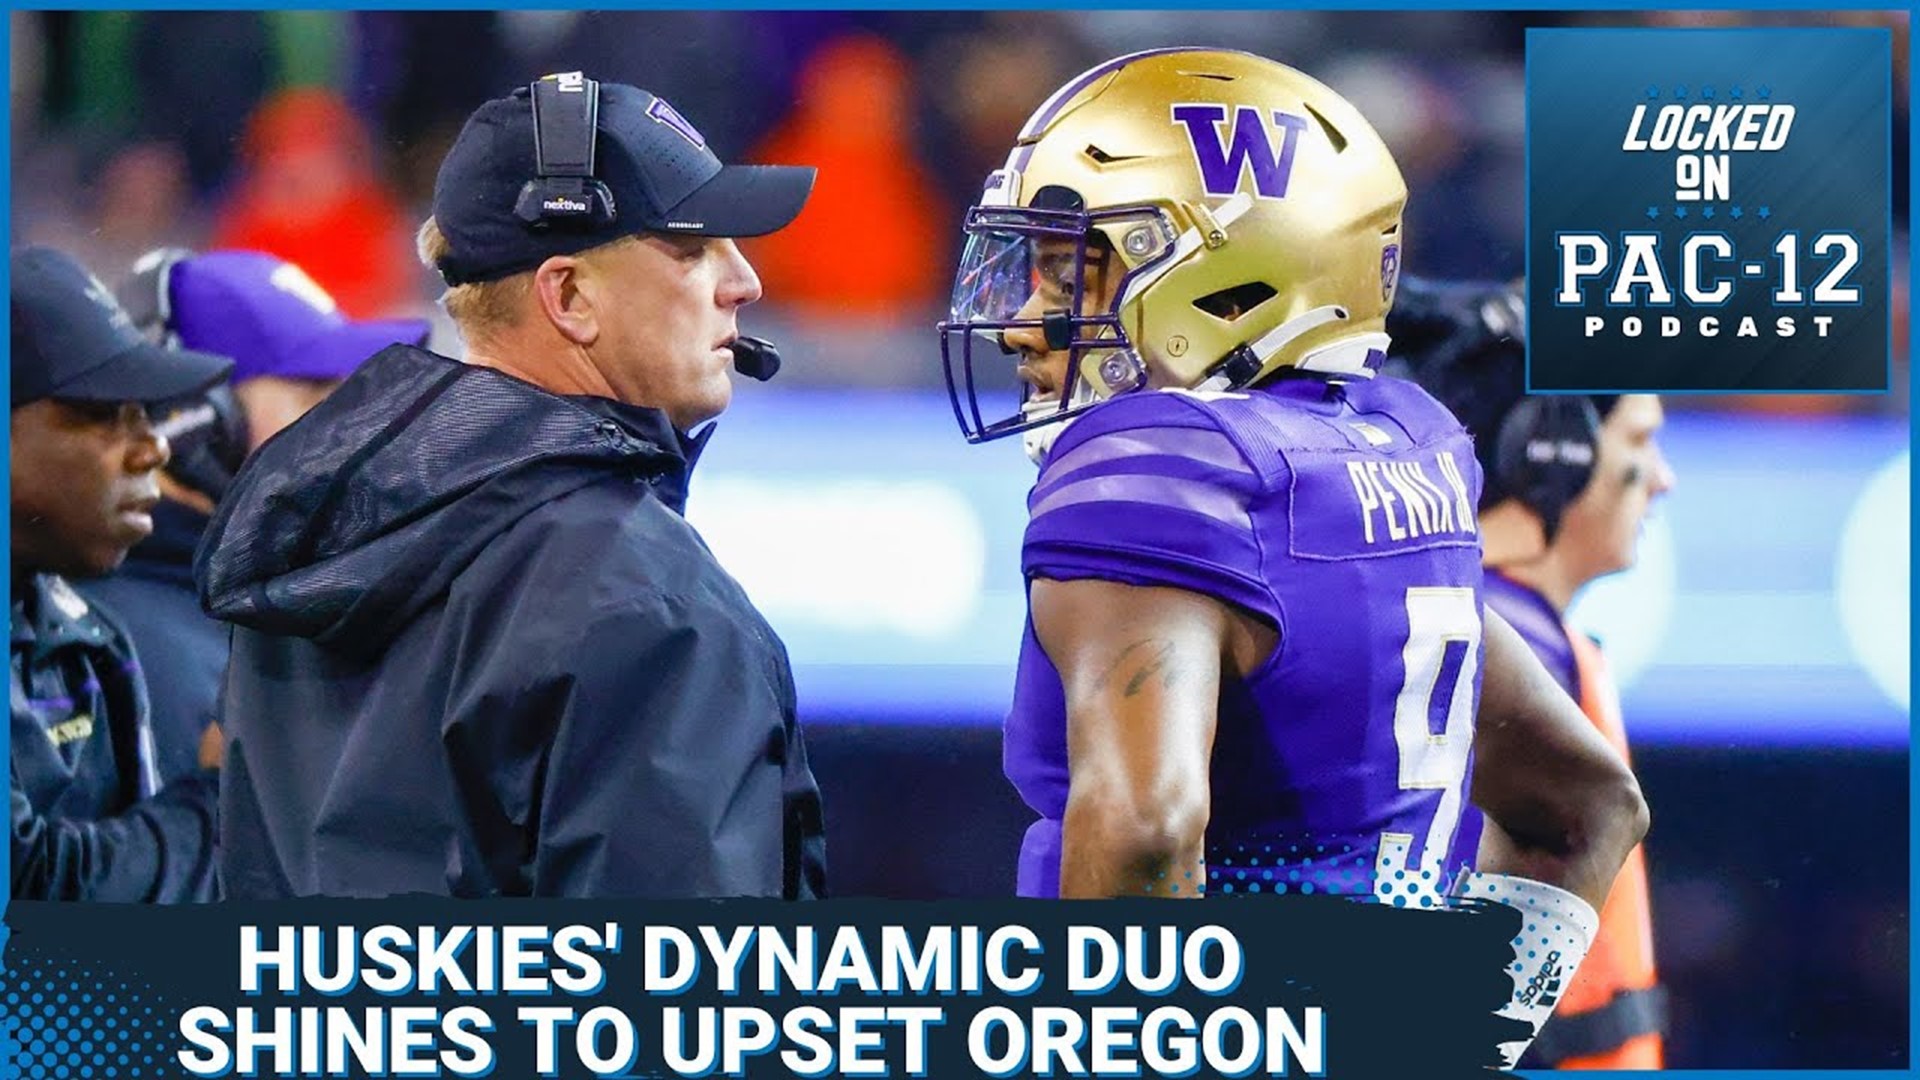 Washington pulled one of the biggest upsets of the year in Pac-12 conference play, knocking off Oregon inside Autzen Stadium.